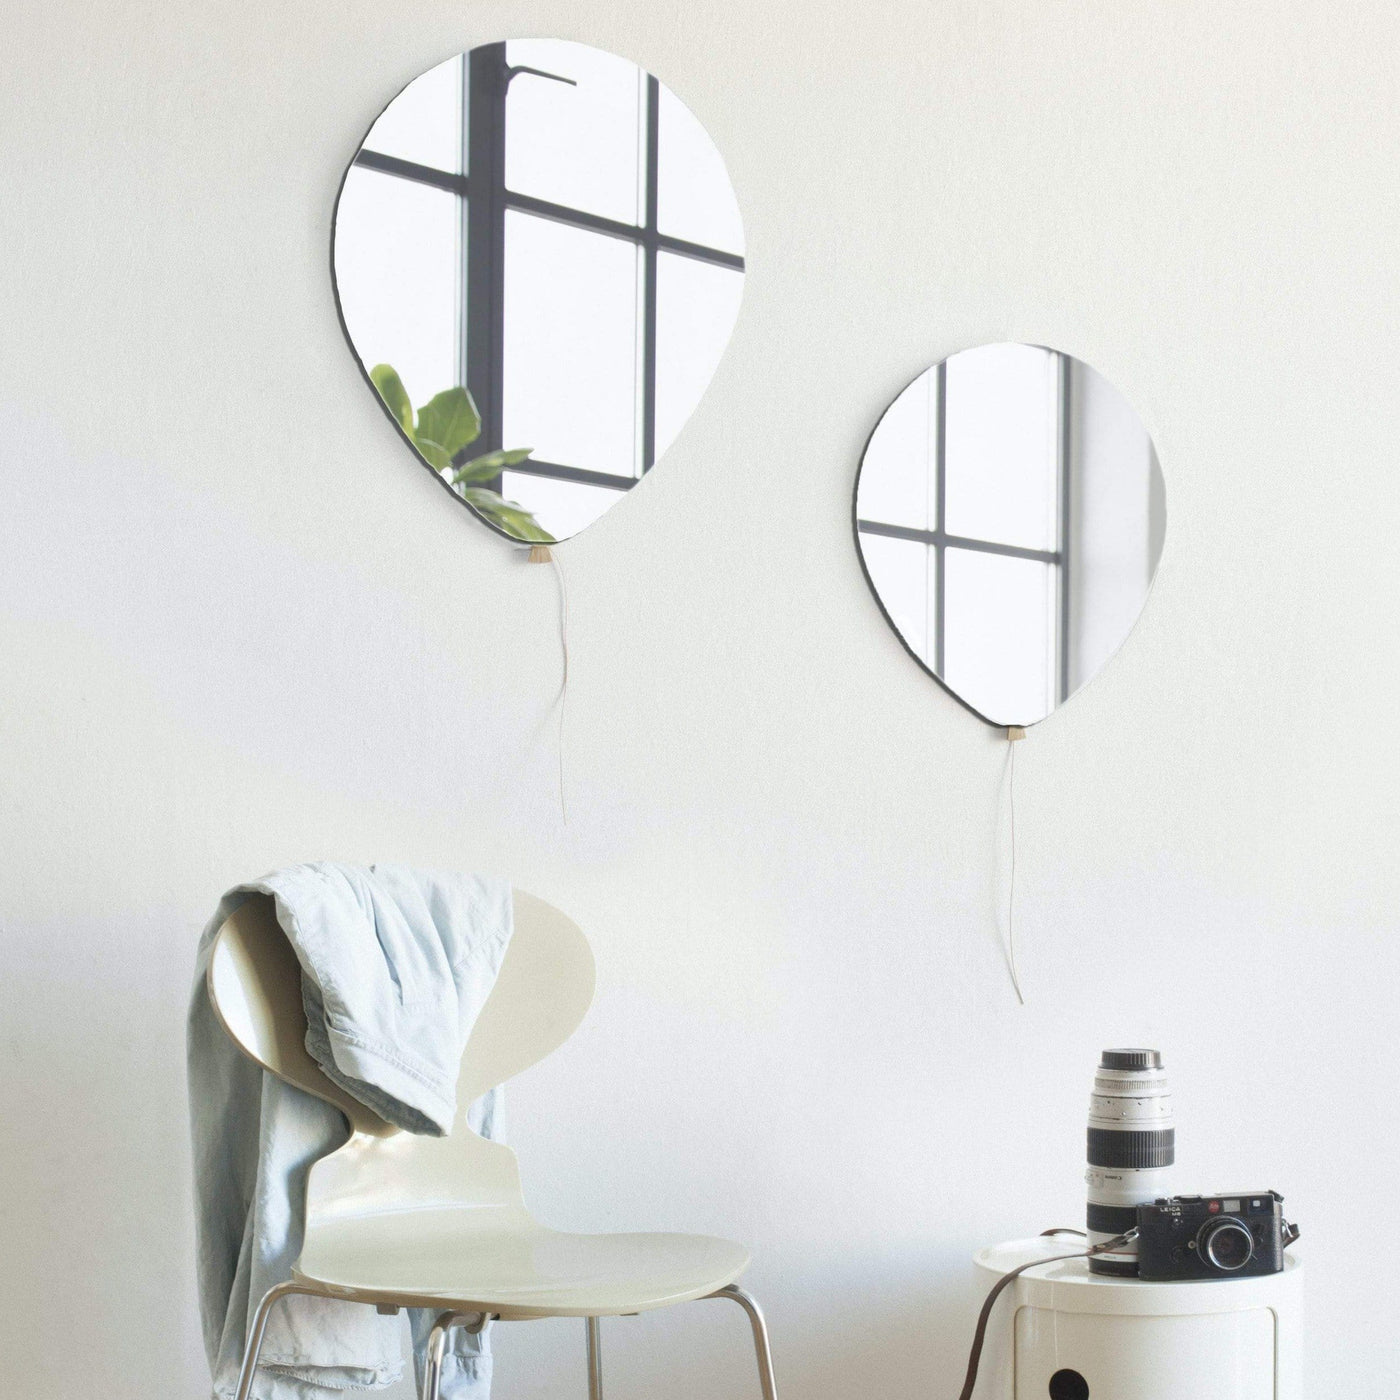 EO Balloon mirrors available in two sizes shop online at someday designs.